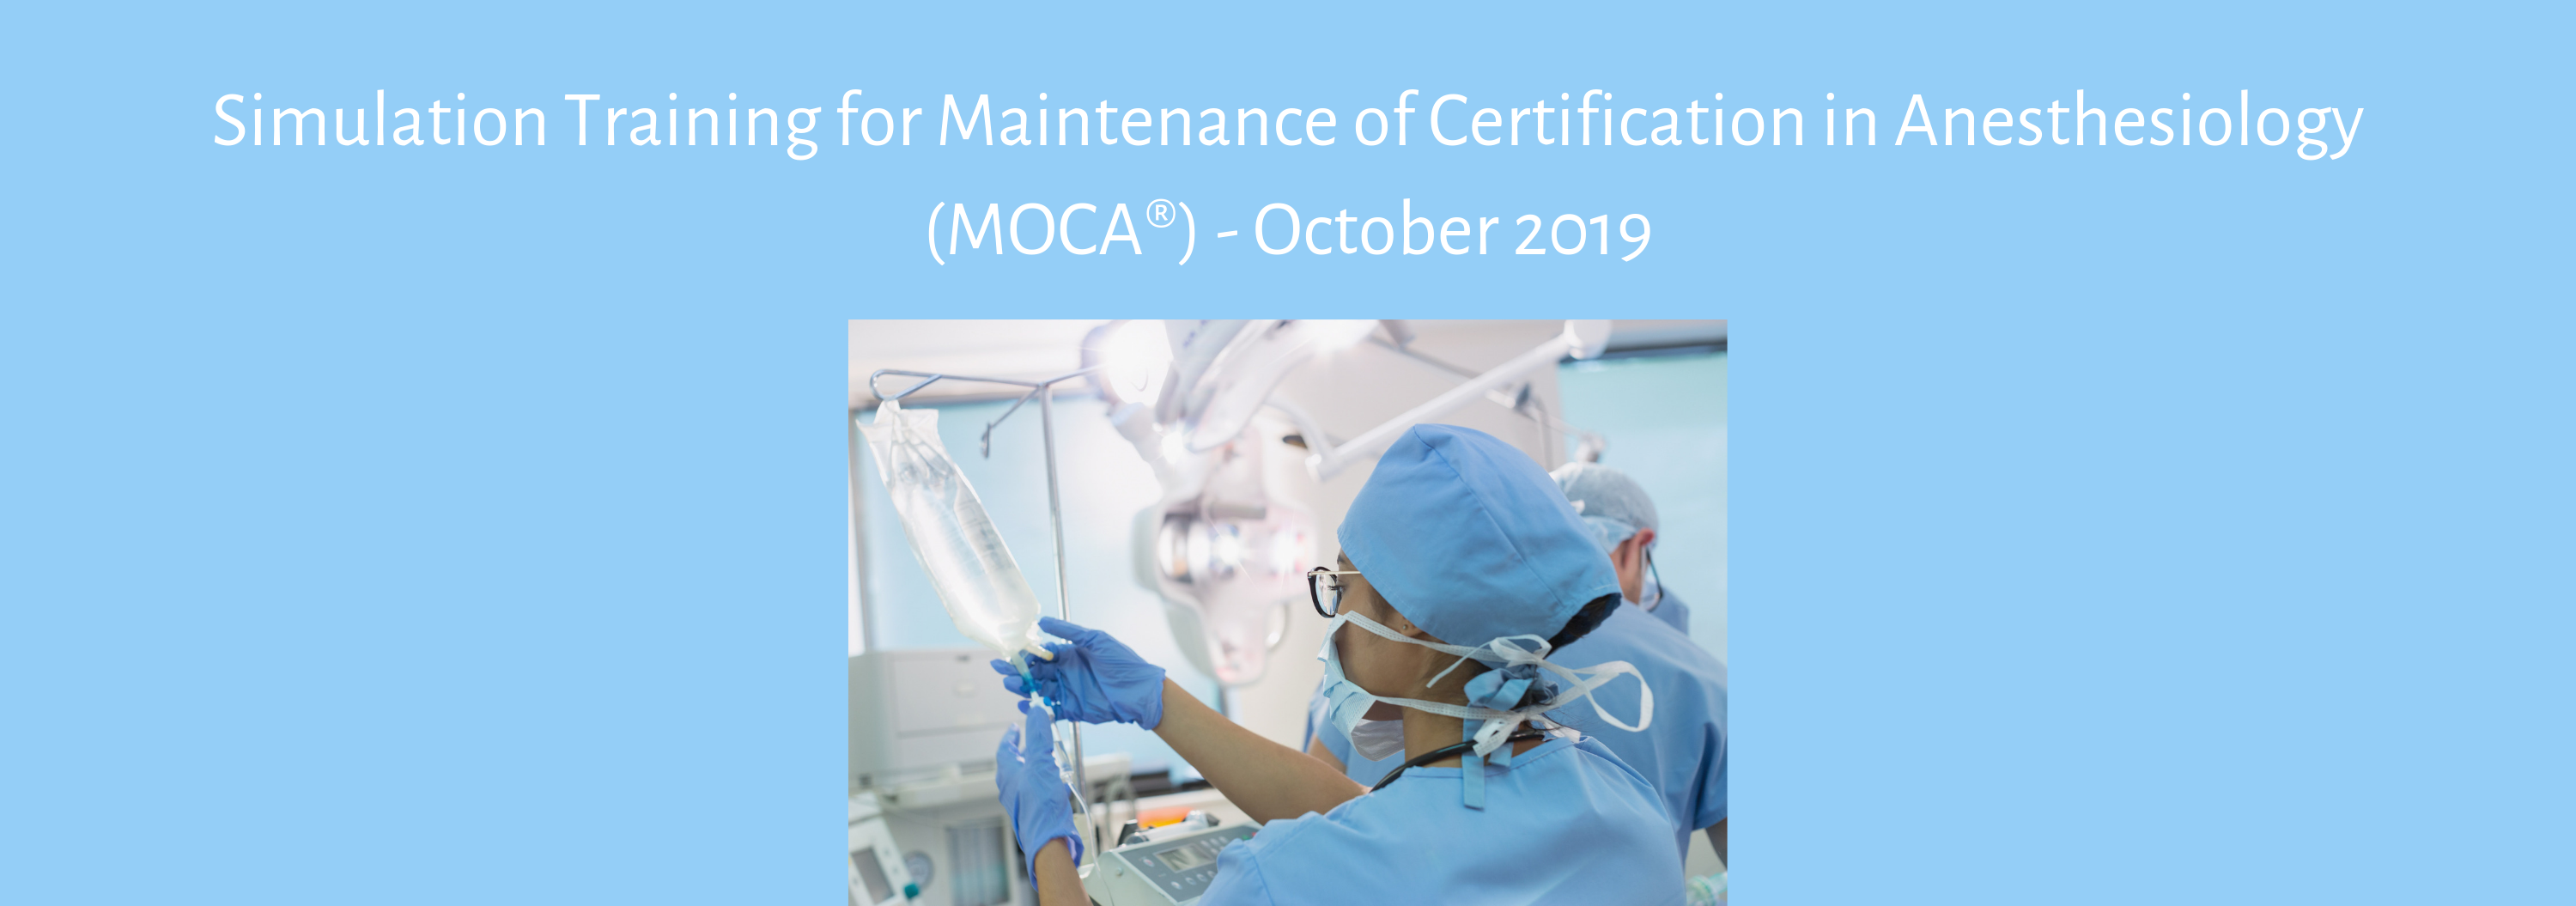 Simulation Training for Maintenance of Certification in Anesthesiology (MOCA®) - October 2019 Banner